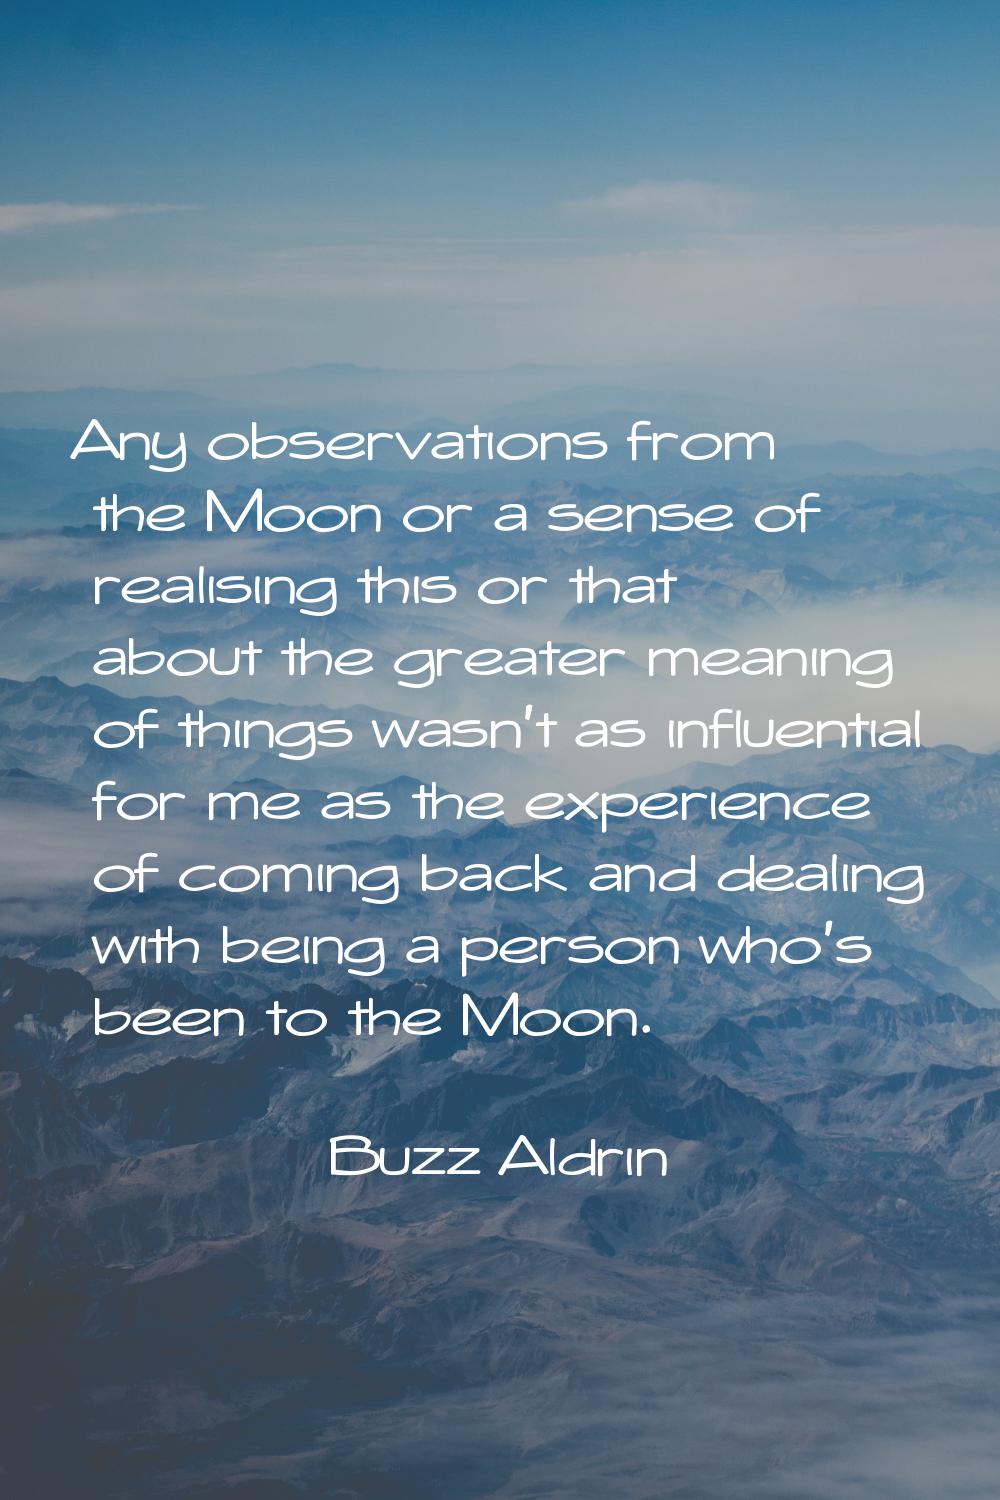 Any observations from the Moon or a sense of realising this or that about the greater meaning of th